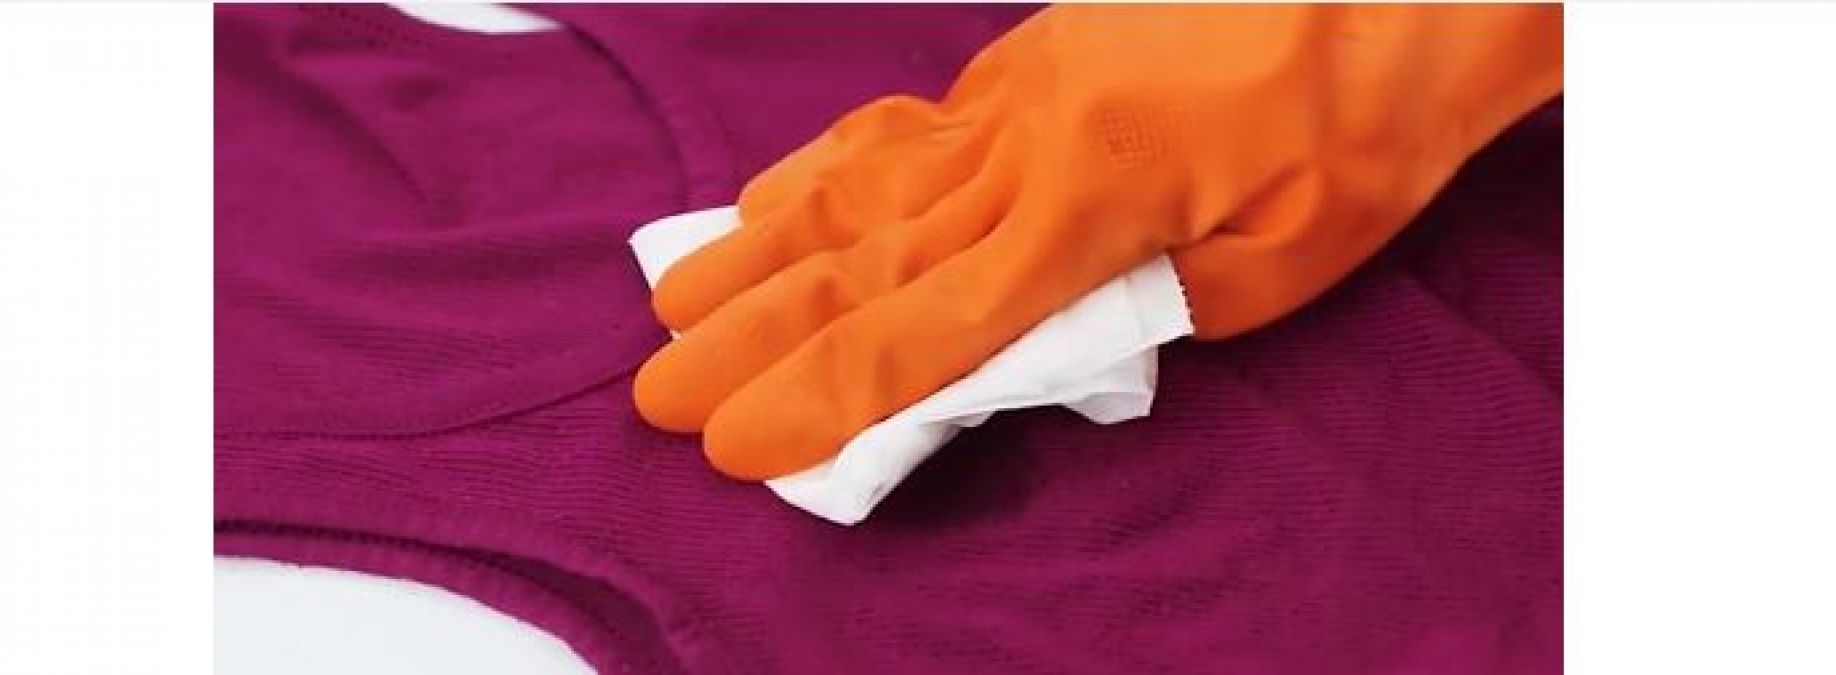 Oil stains can be easily removed from clothes like this